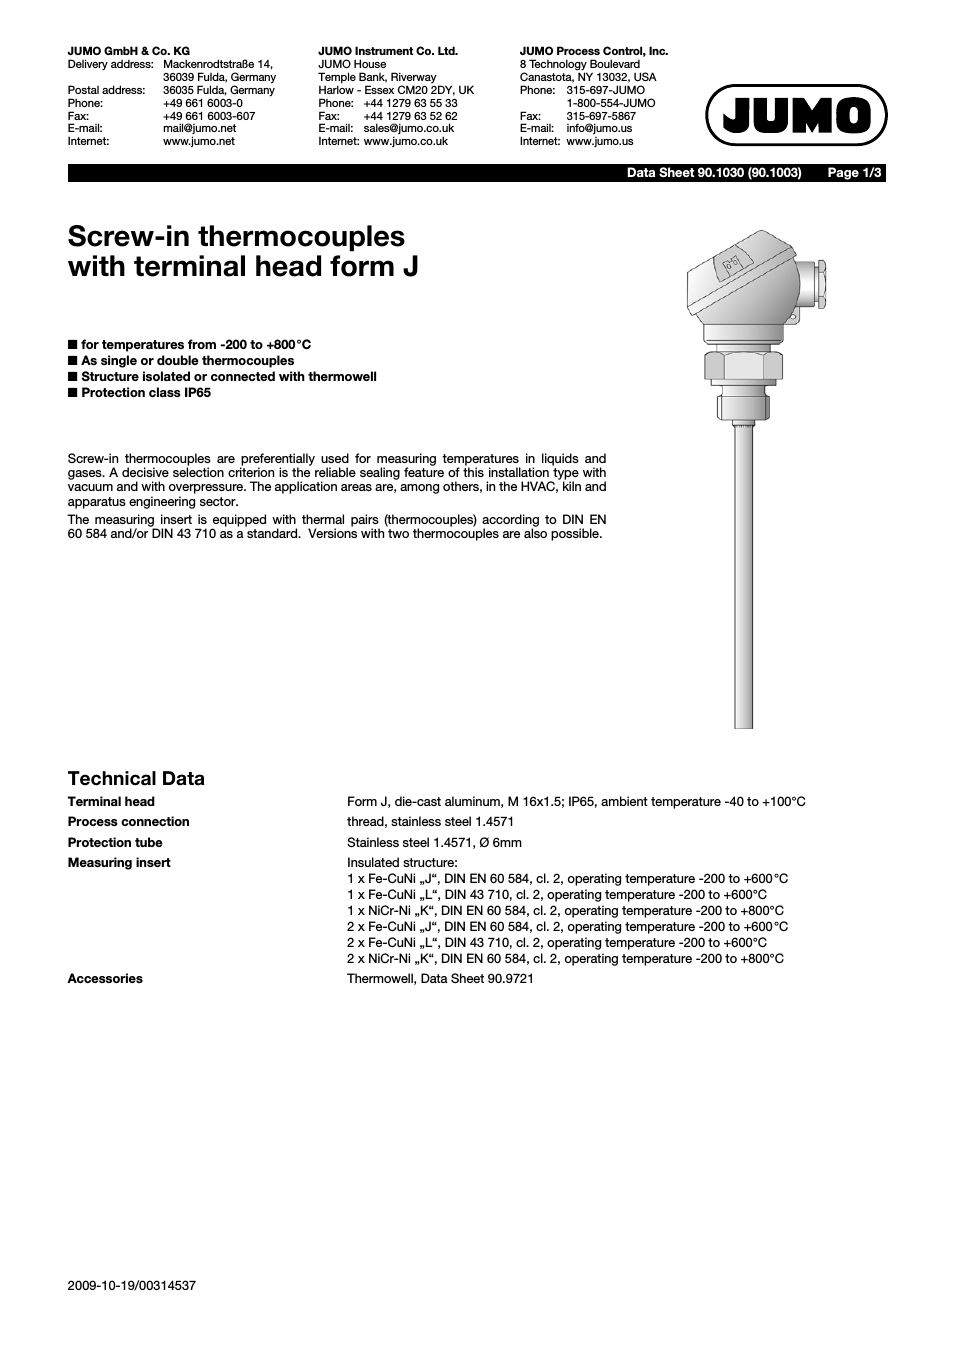 901030 Screw-In Thermocouples with Form J Terminal Head Data Sheet